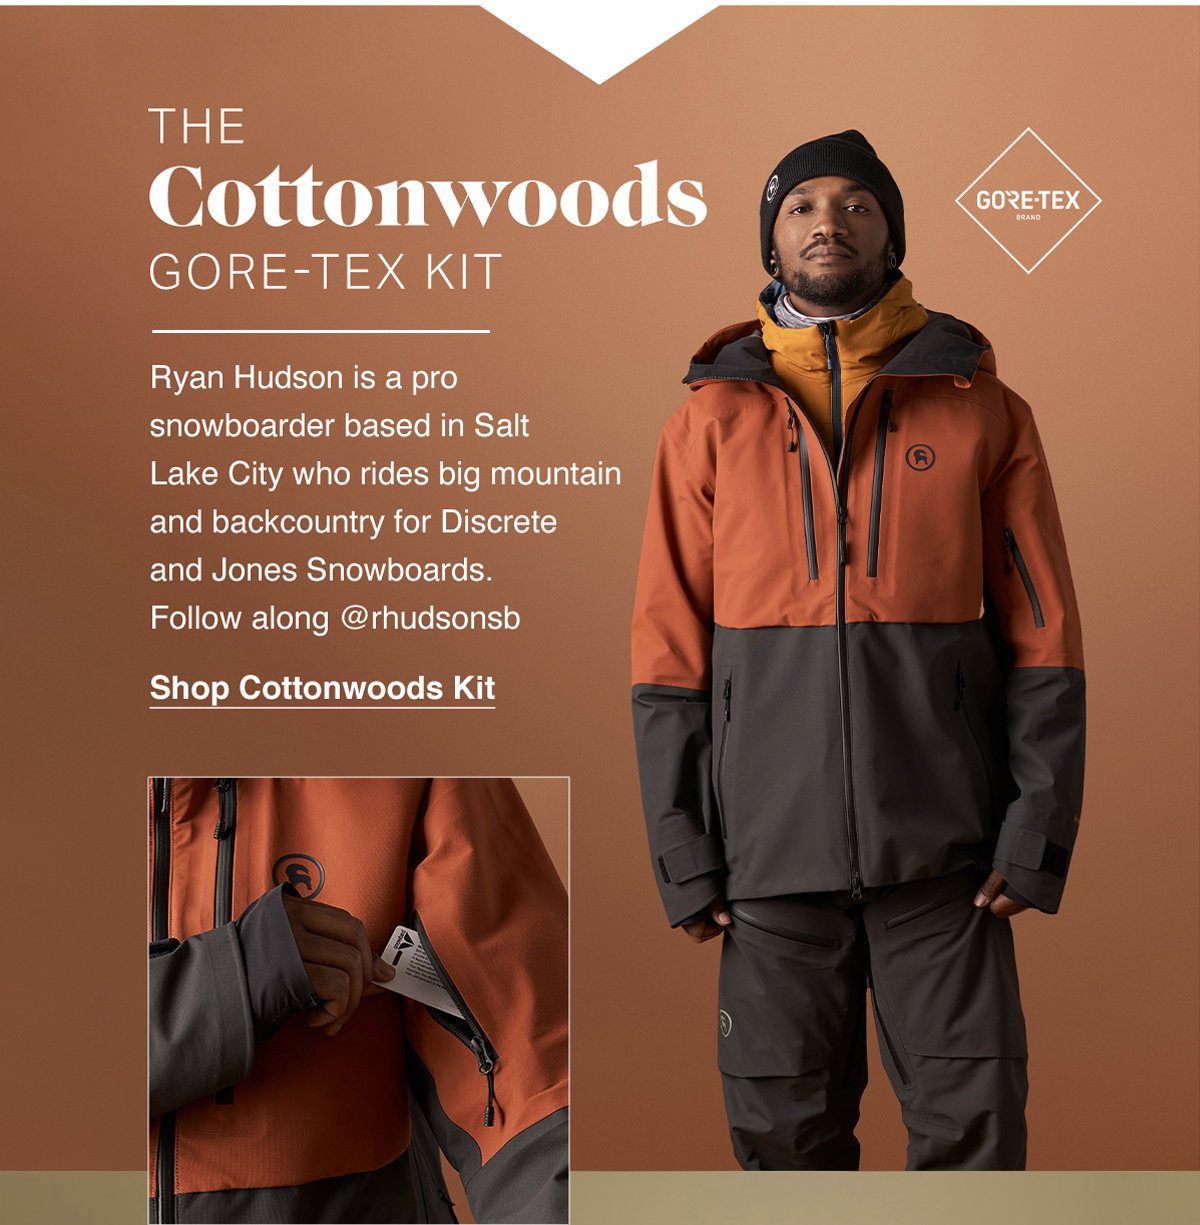 Backcountry Com New Kits Built By Backcountry With Gore Tex Technology Milled